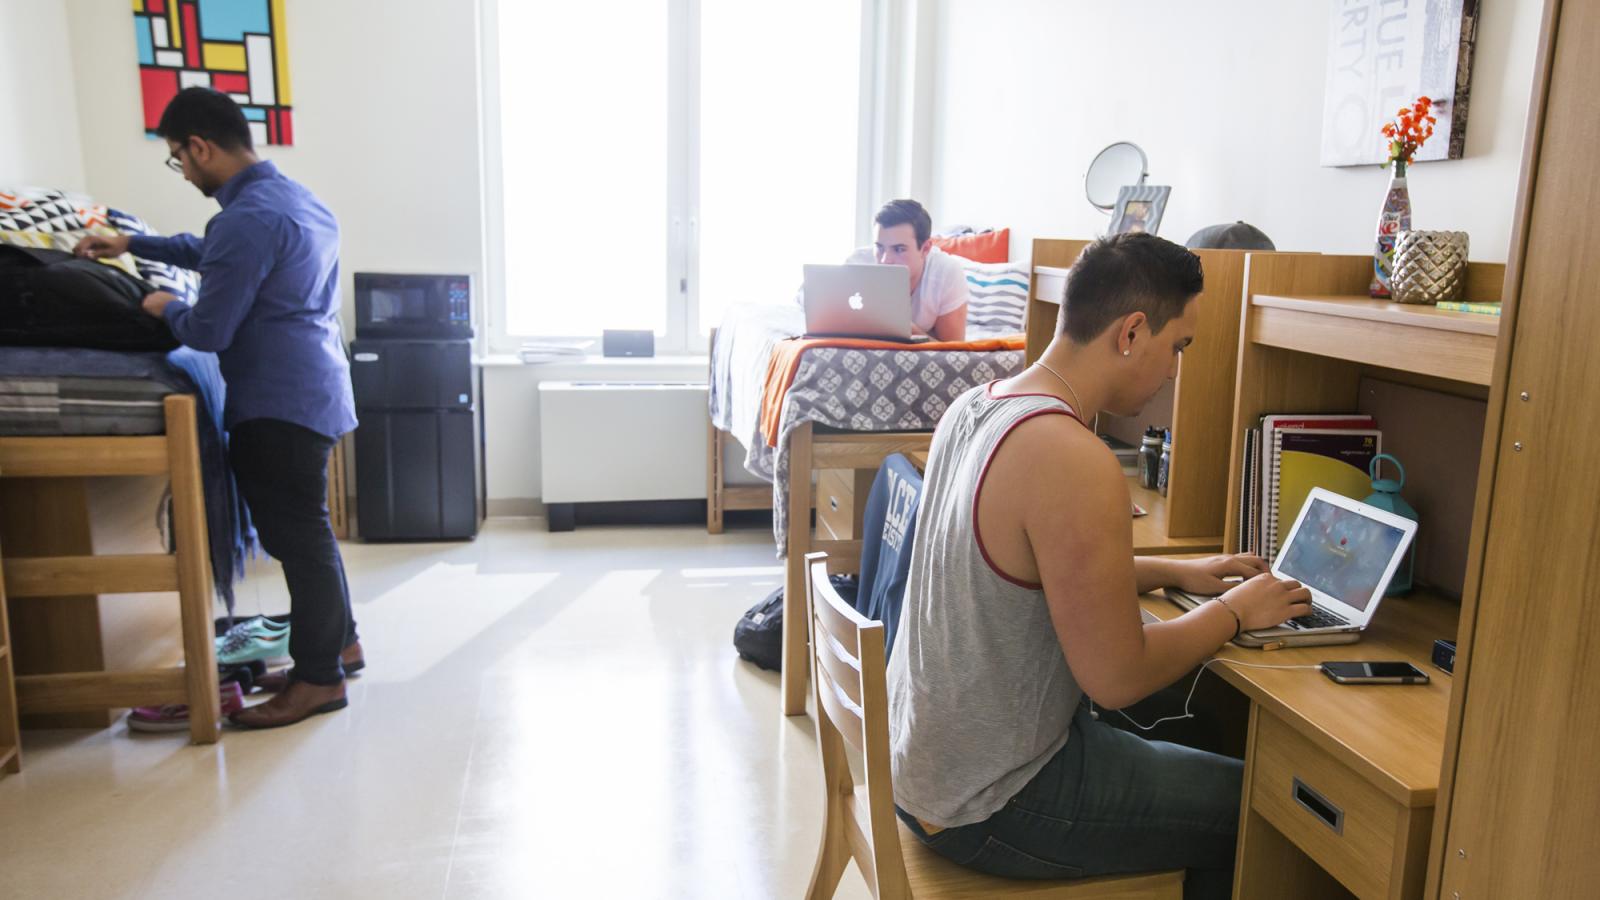 Students studying in their residential halls.